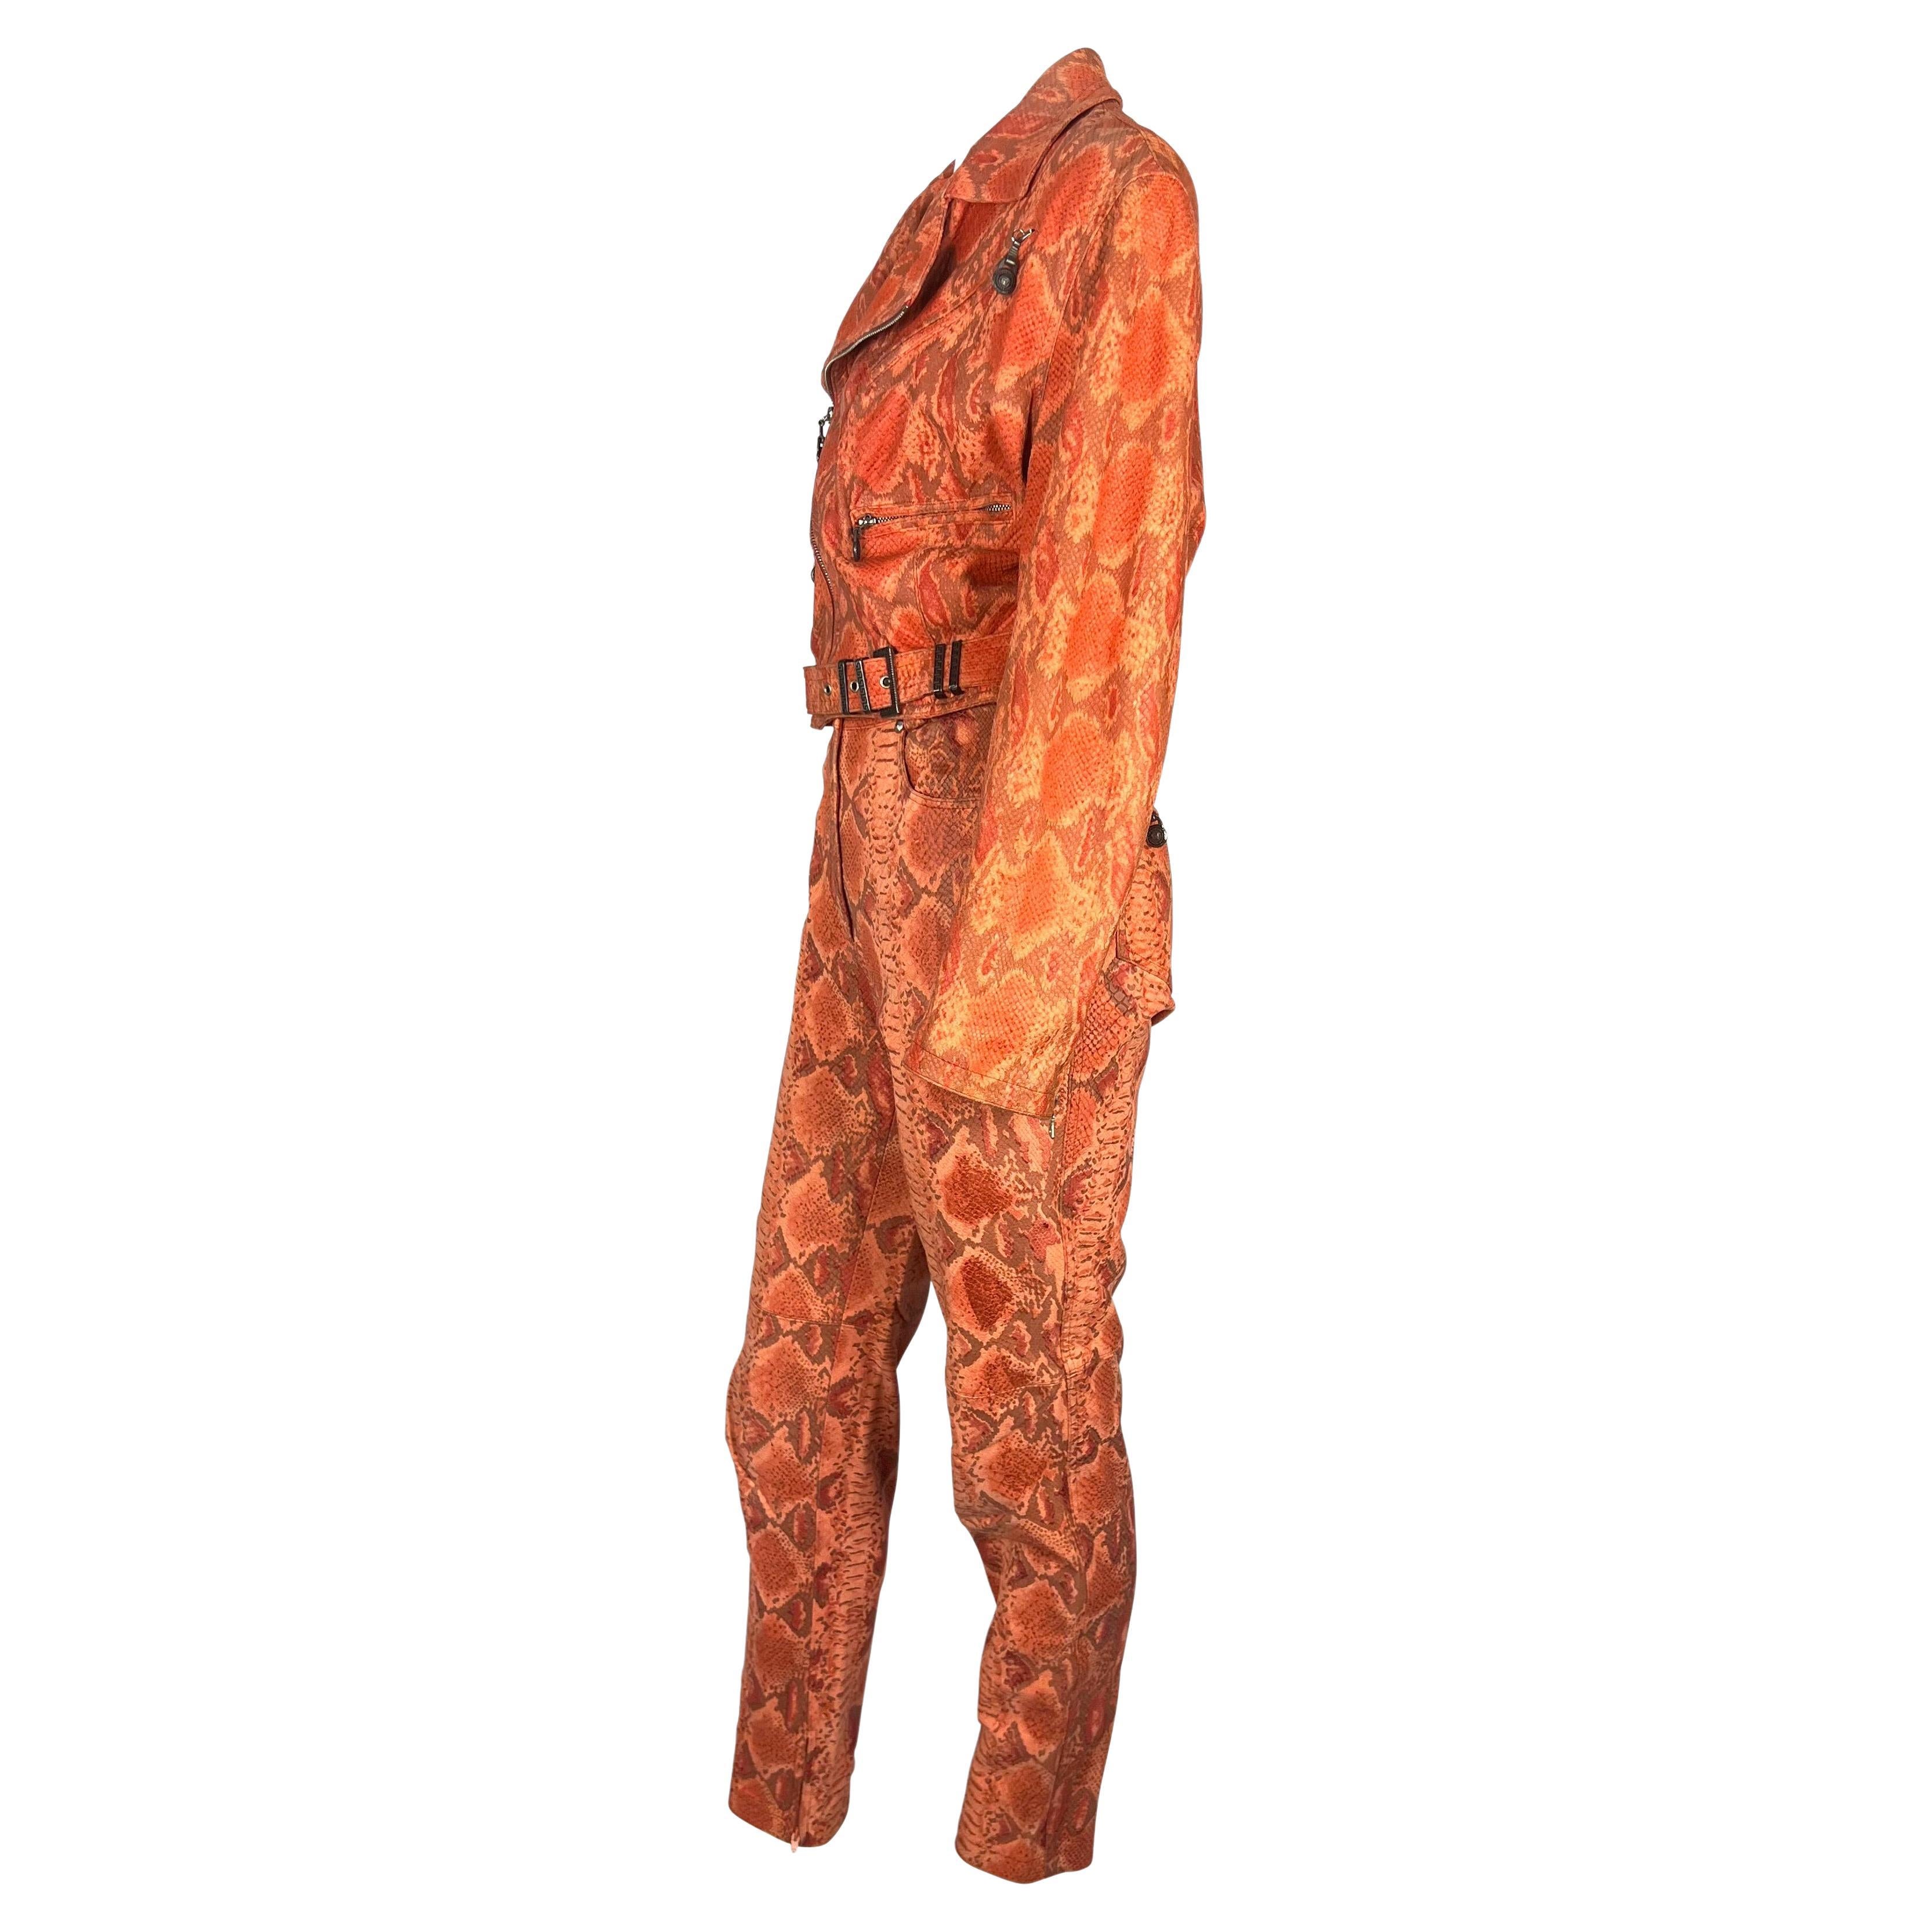 F/W 1994 Gianni Versace Orange Red Faux Snakeskin Medusa Biker Jacket Pant Set In Good Condition For Sale In West Hollywood, CA